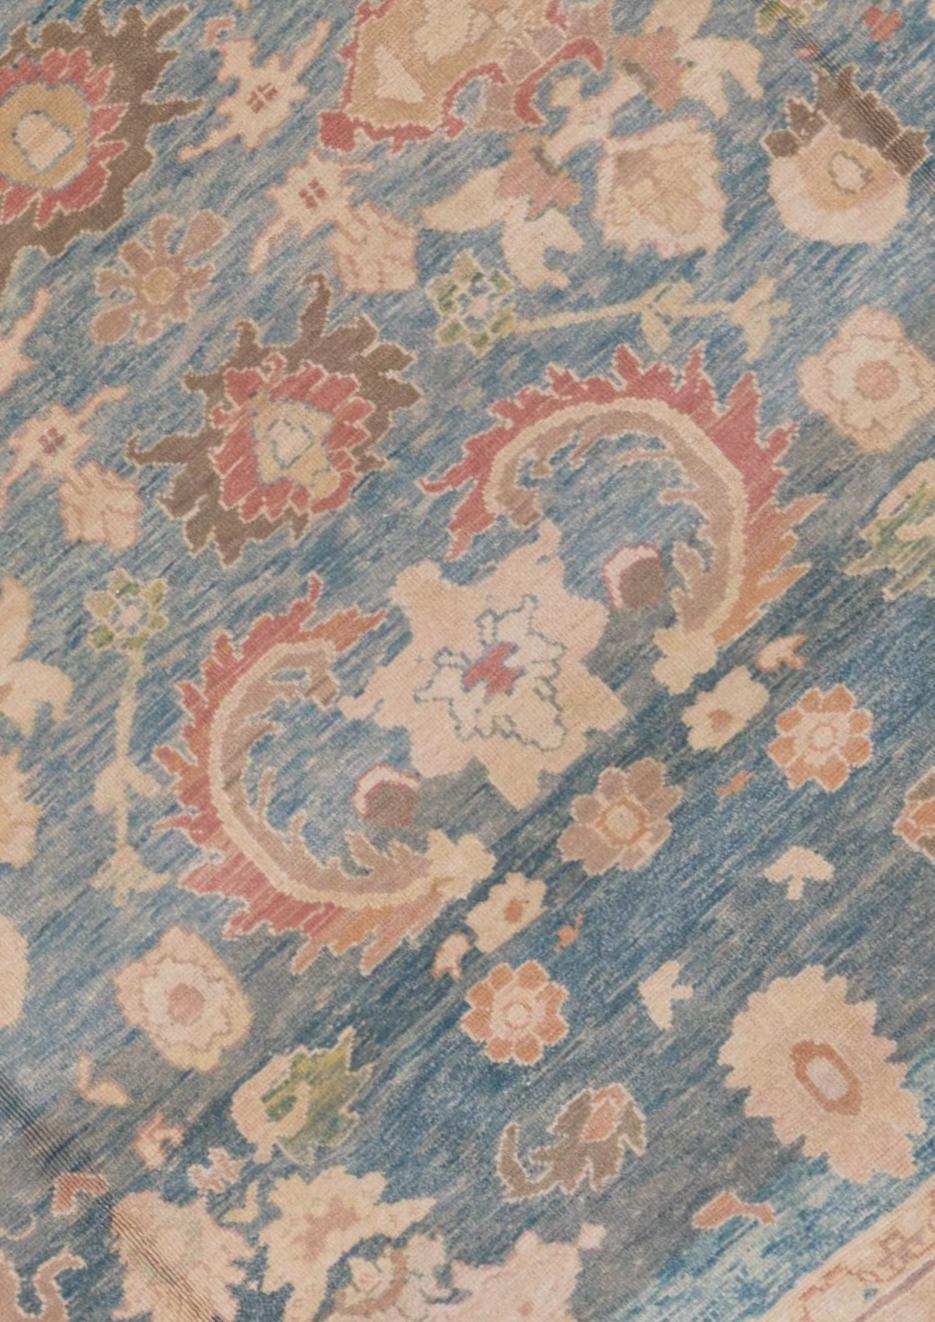 Hand-Knotted Sultanabad Carpet, Blue Field, Handmade Wool Carpet